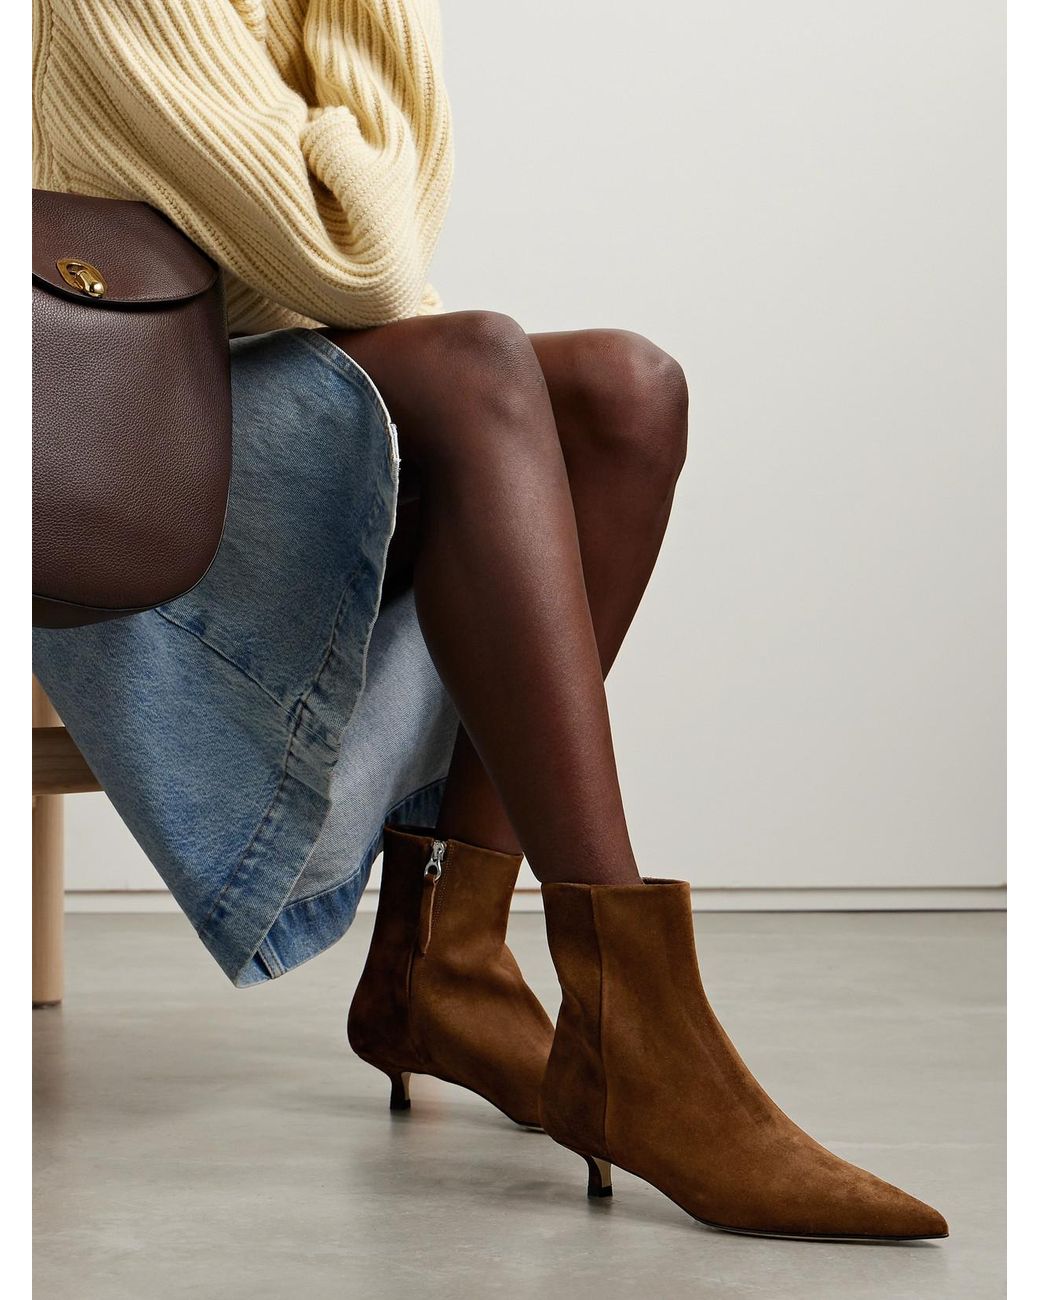 Aeyde Sofie Suede Ankle Boots in Brown